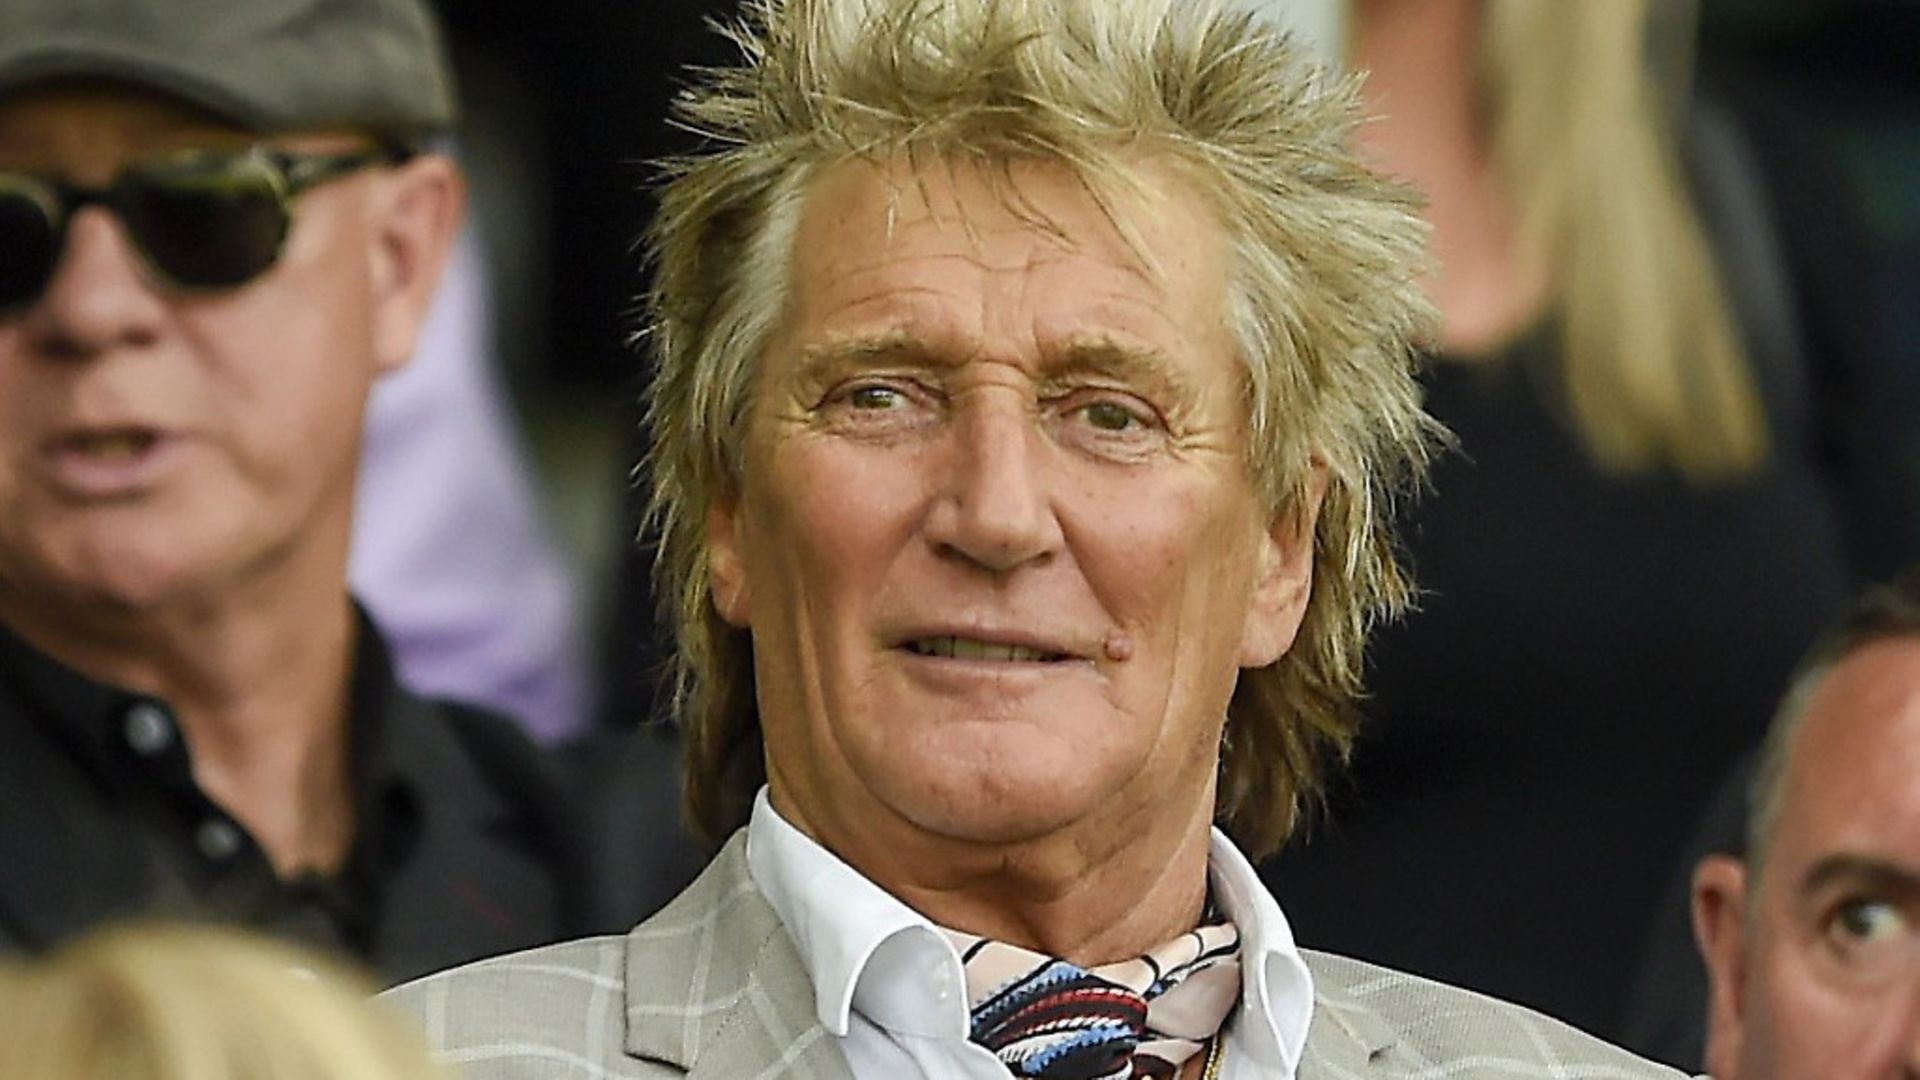 Rod Stewart has fallen foul of Celtic fans after congratulating Boris Johnson in a tweet. Picture: Ian Rutherford/PA Wire/PA Images - Credit: PA Wire/PA Images